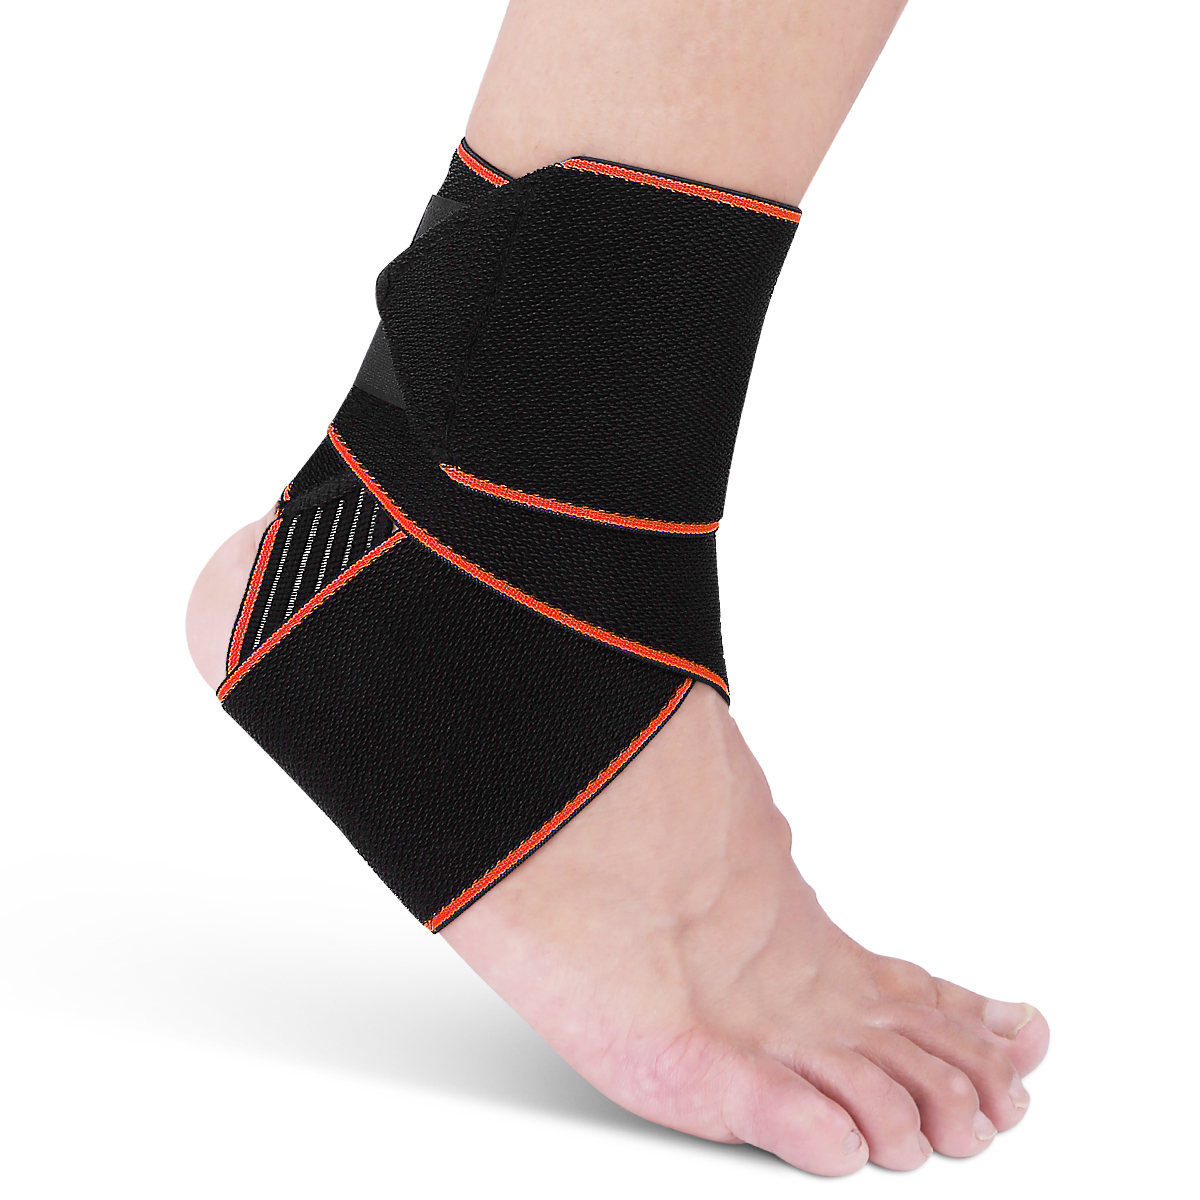 AVIDDA Ankle Brace Support Compression Adjustable, Ankle Support Wrap for Men Women Breathable Foot Support Brace for Plantar Fasciitis, Tendonitis, Joint Pain, One Size Fits All One Piece Orange